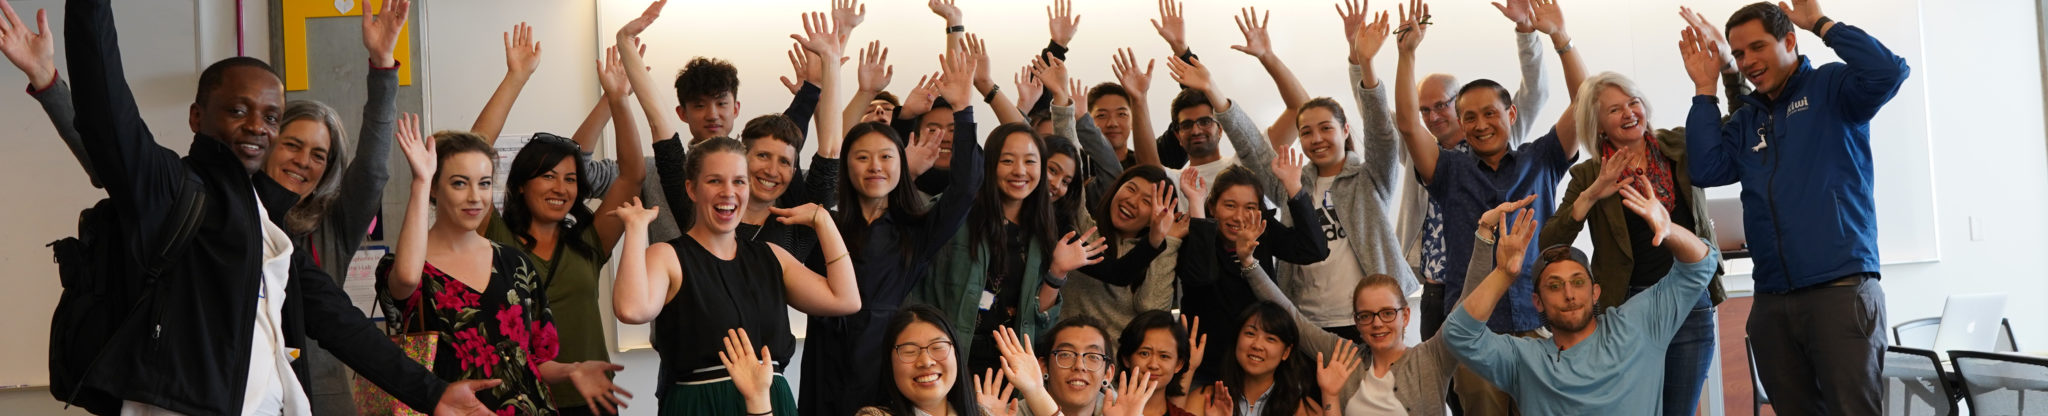 Participants of Hackathon with their hands in the air.